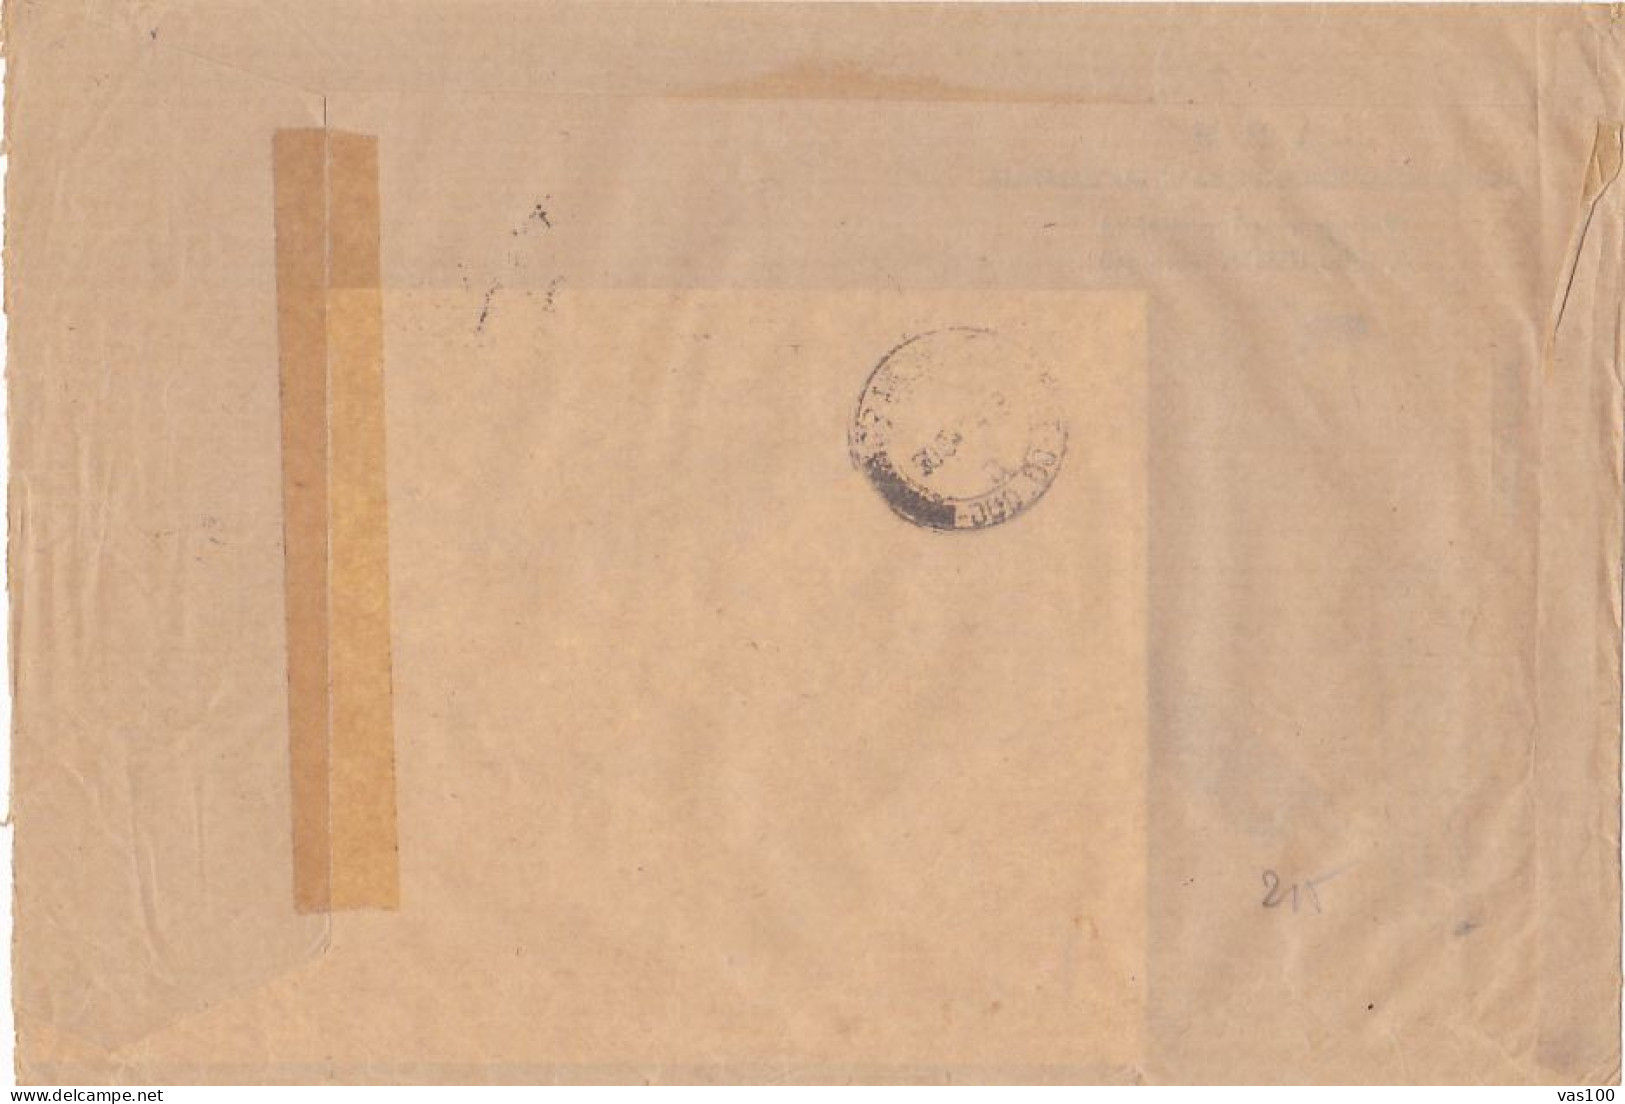 BEACH HOUSE, STAMPS ON COVER, 1994, PORTUGAL - Covers & Documents